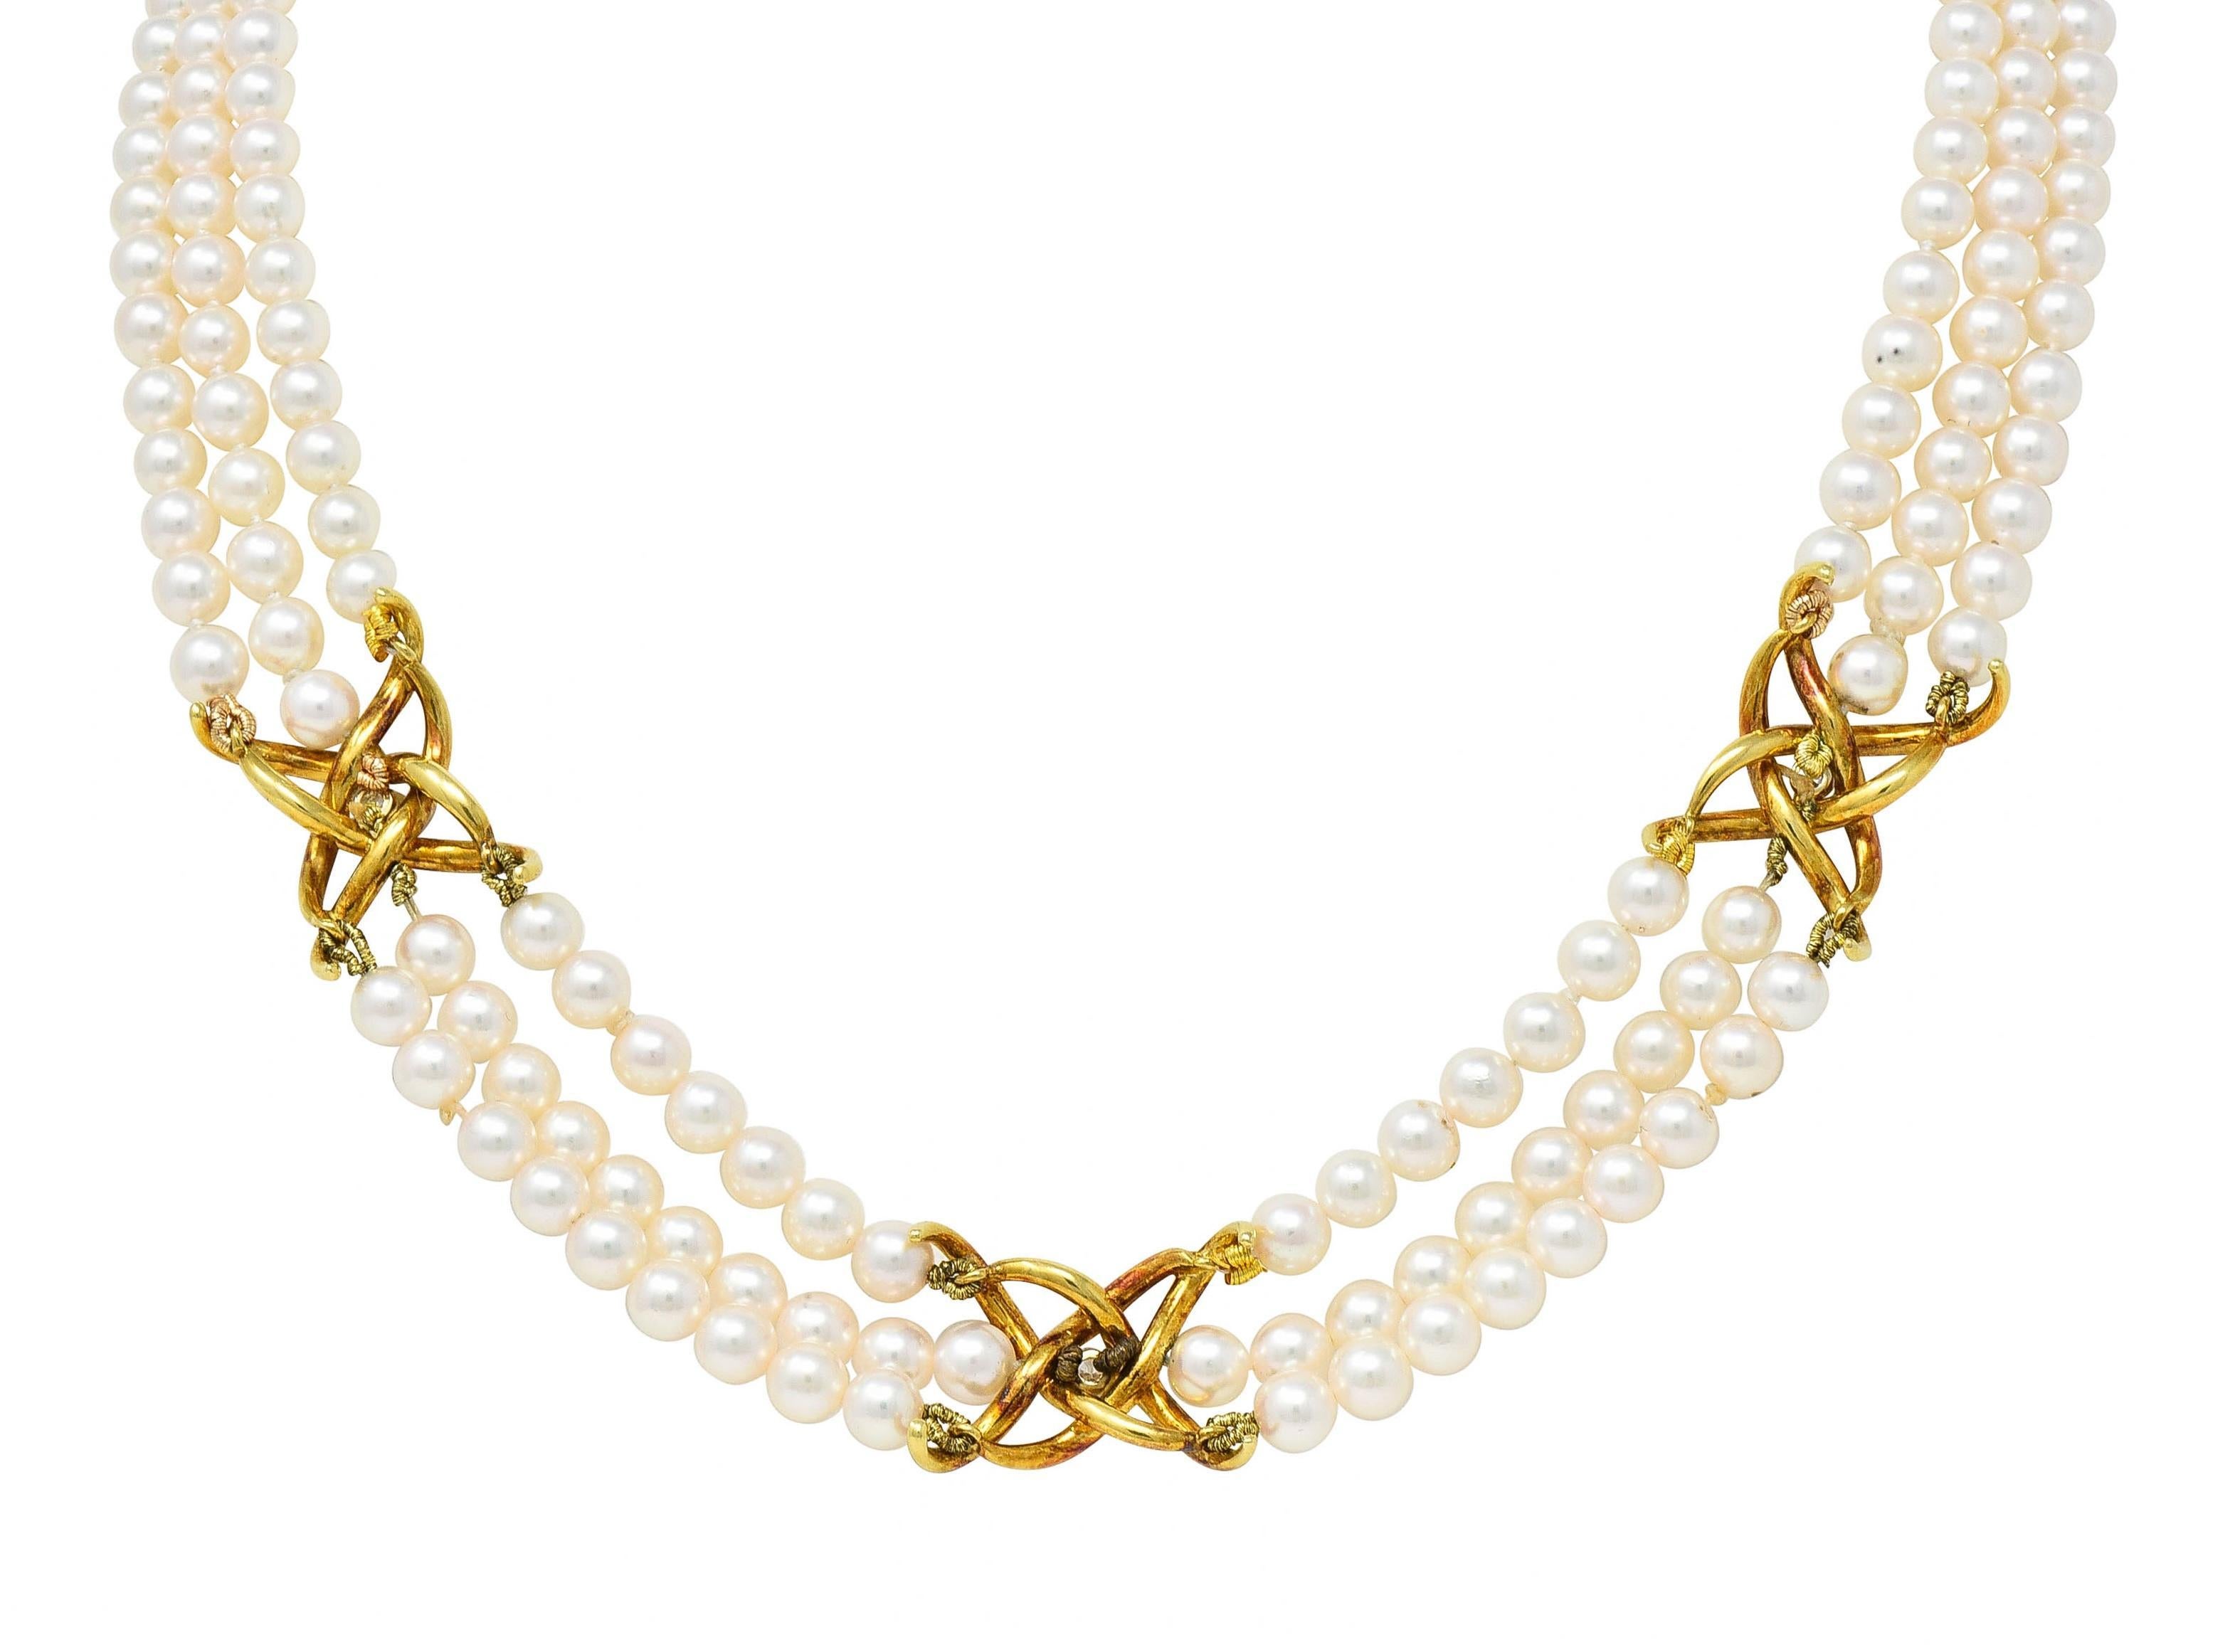 Tiffany & Co. 1980's Pearl Diamond 18 Karat Gold Vintage Multi-Strand Necklace In Excellent Condition For Sale In Philadelphia, PA